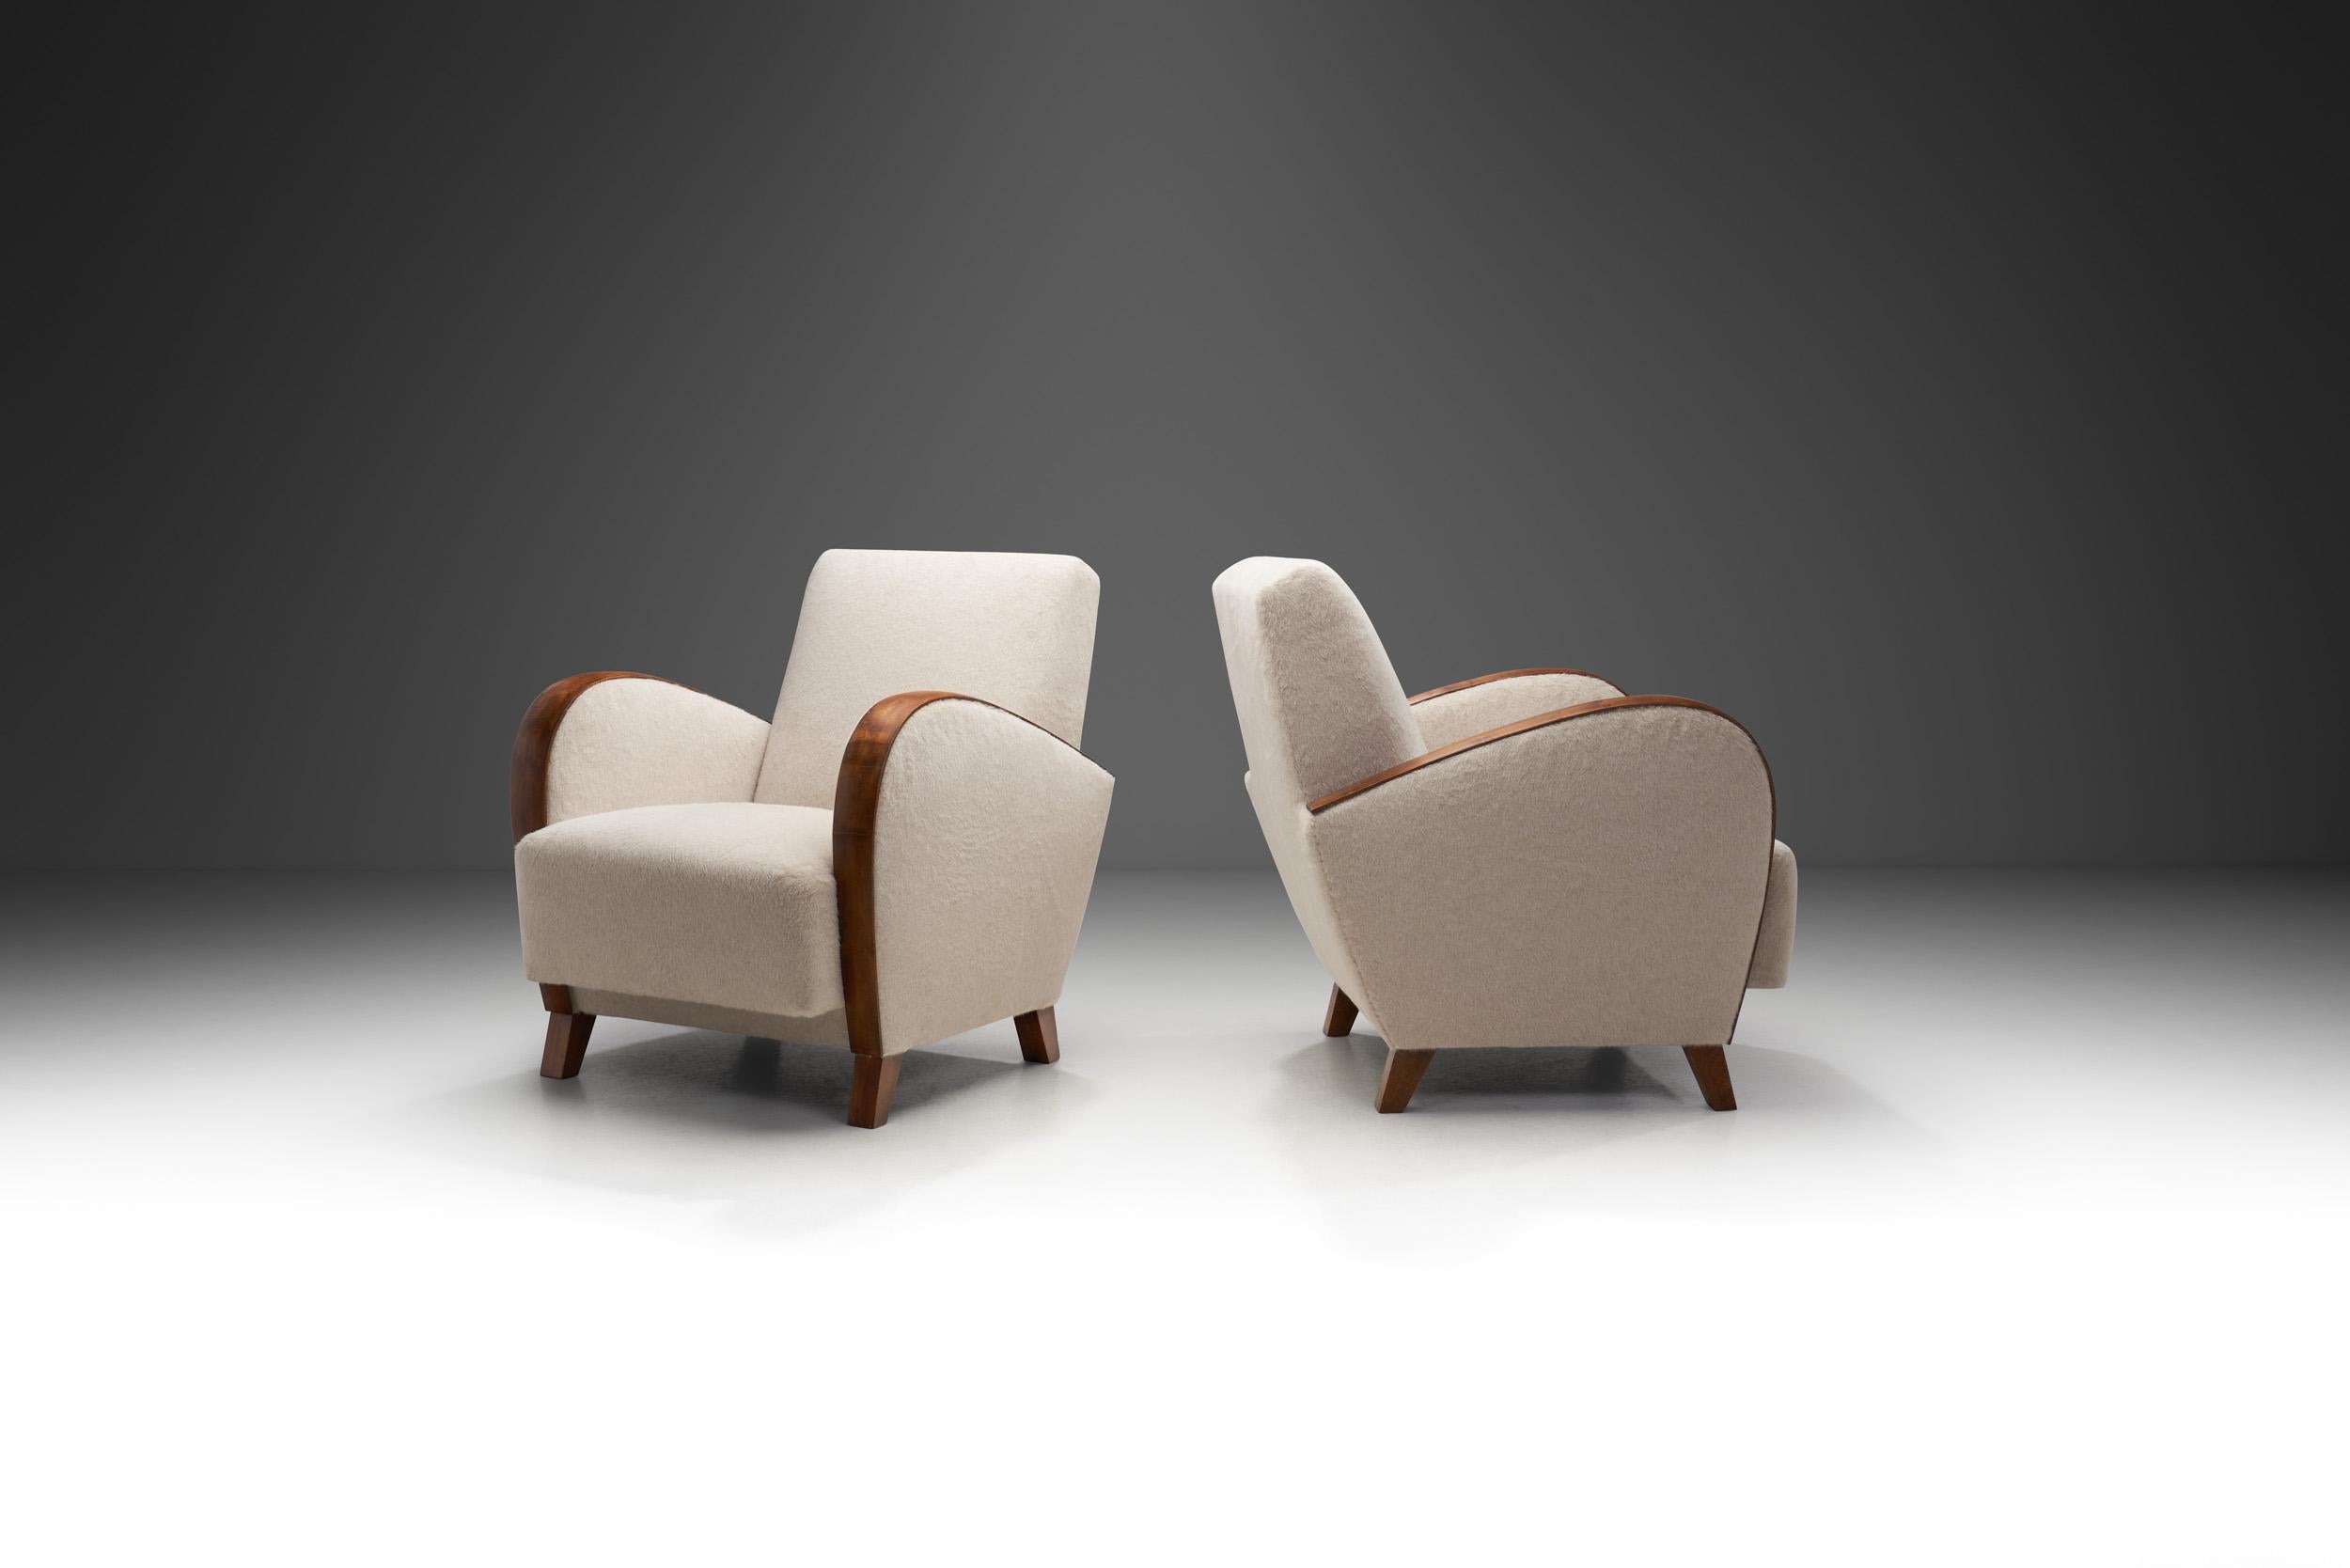 Scandinavian Modern For RoseMarie - Lounge Chairs with Wooden Arm Overlays, Scandinavia 1930s